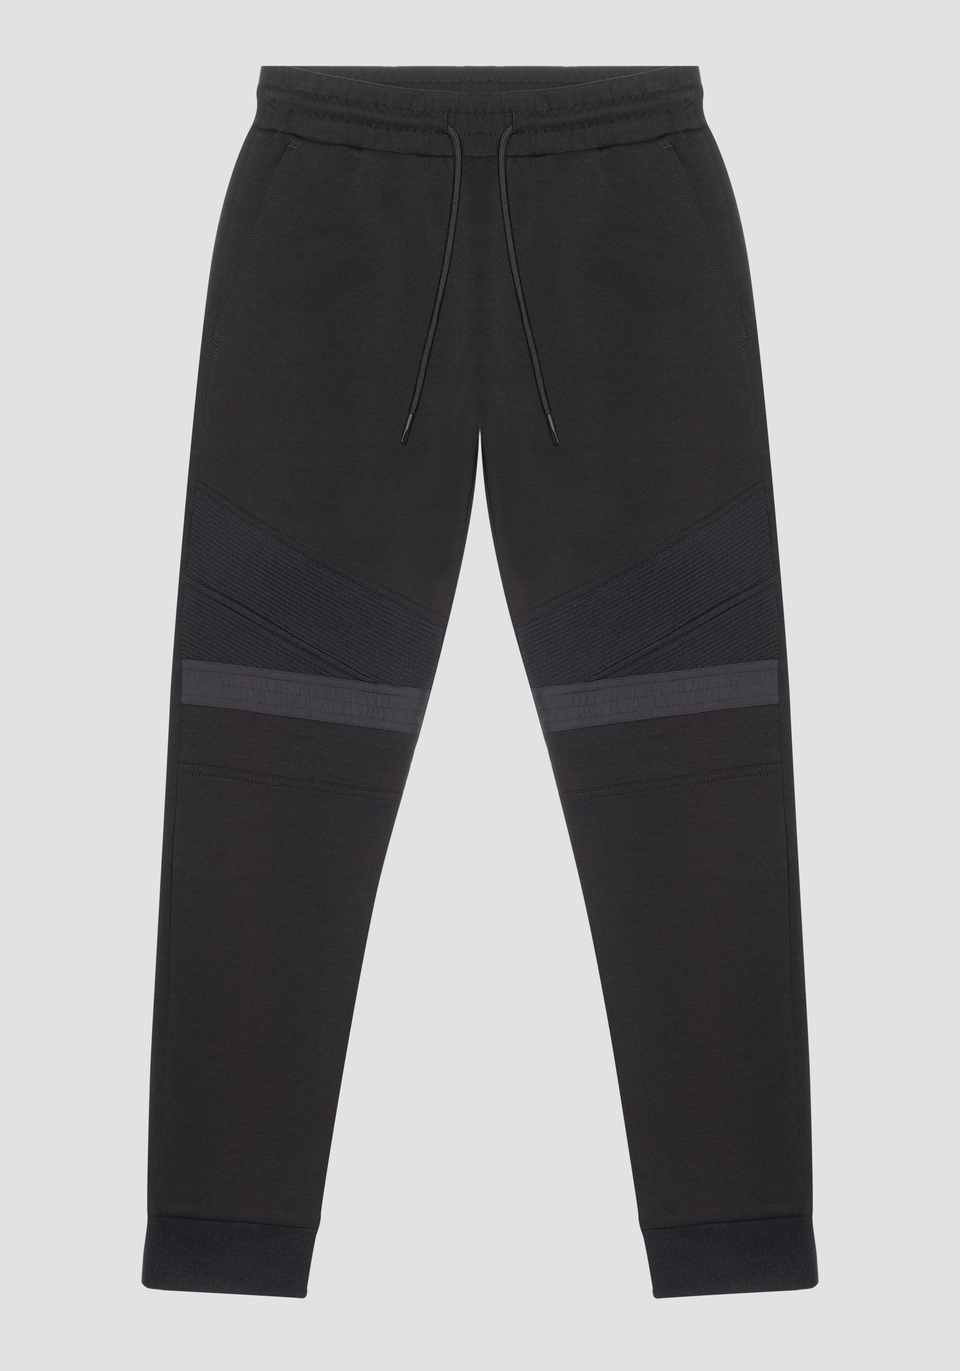 SUPER SLIM FIT TROUSERS IN COTTON BLEND FABRIC WITH CONTRAST IN NYLON SHIOZE - Antony Morato Online Shop